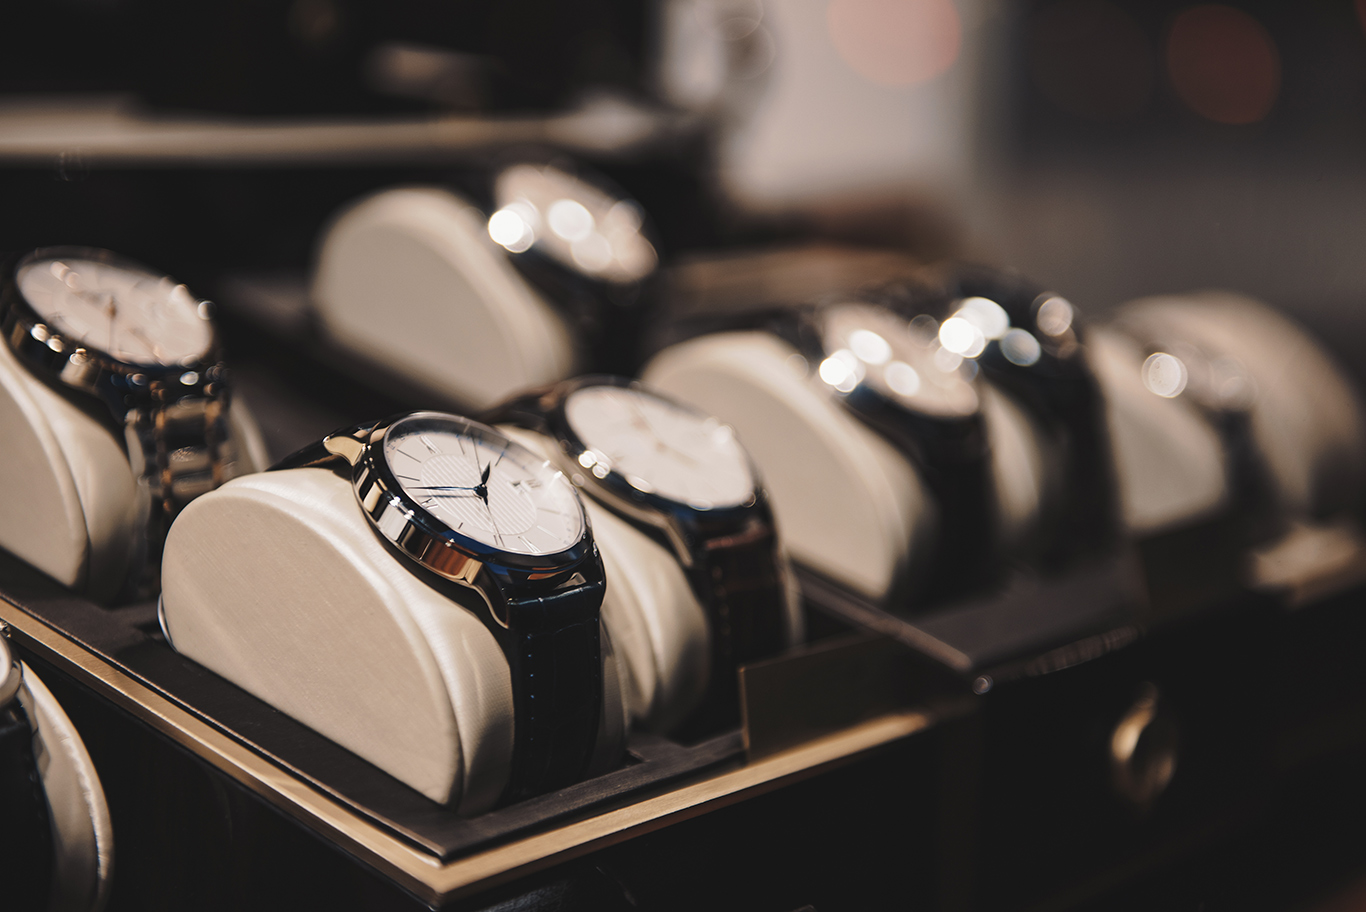 A collection of watches on sale. (Image: Shutterstock)